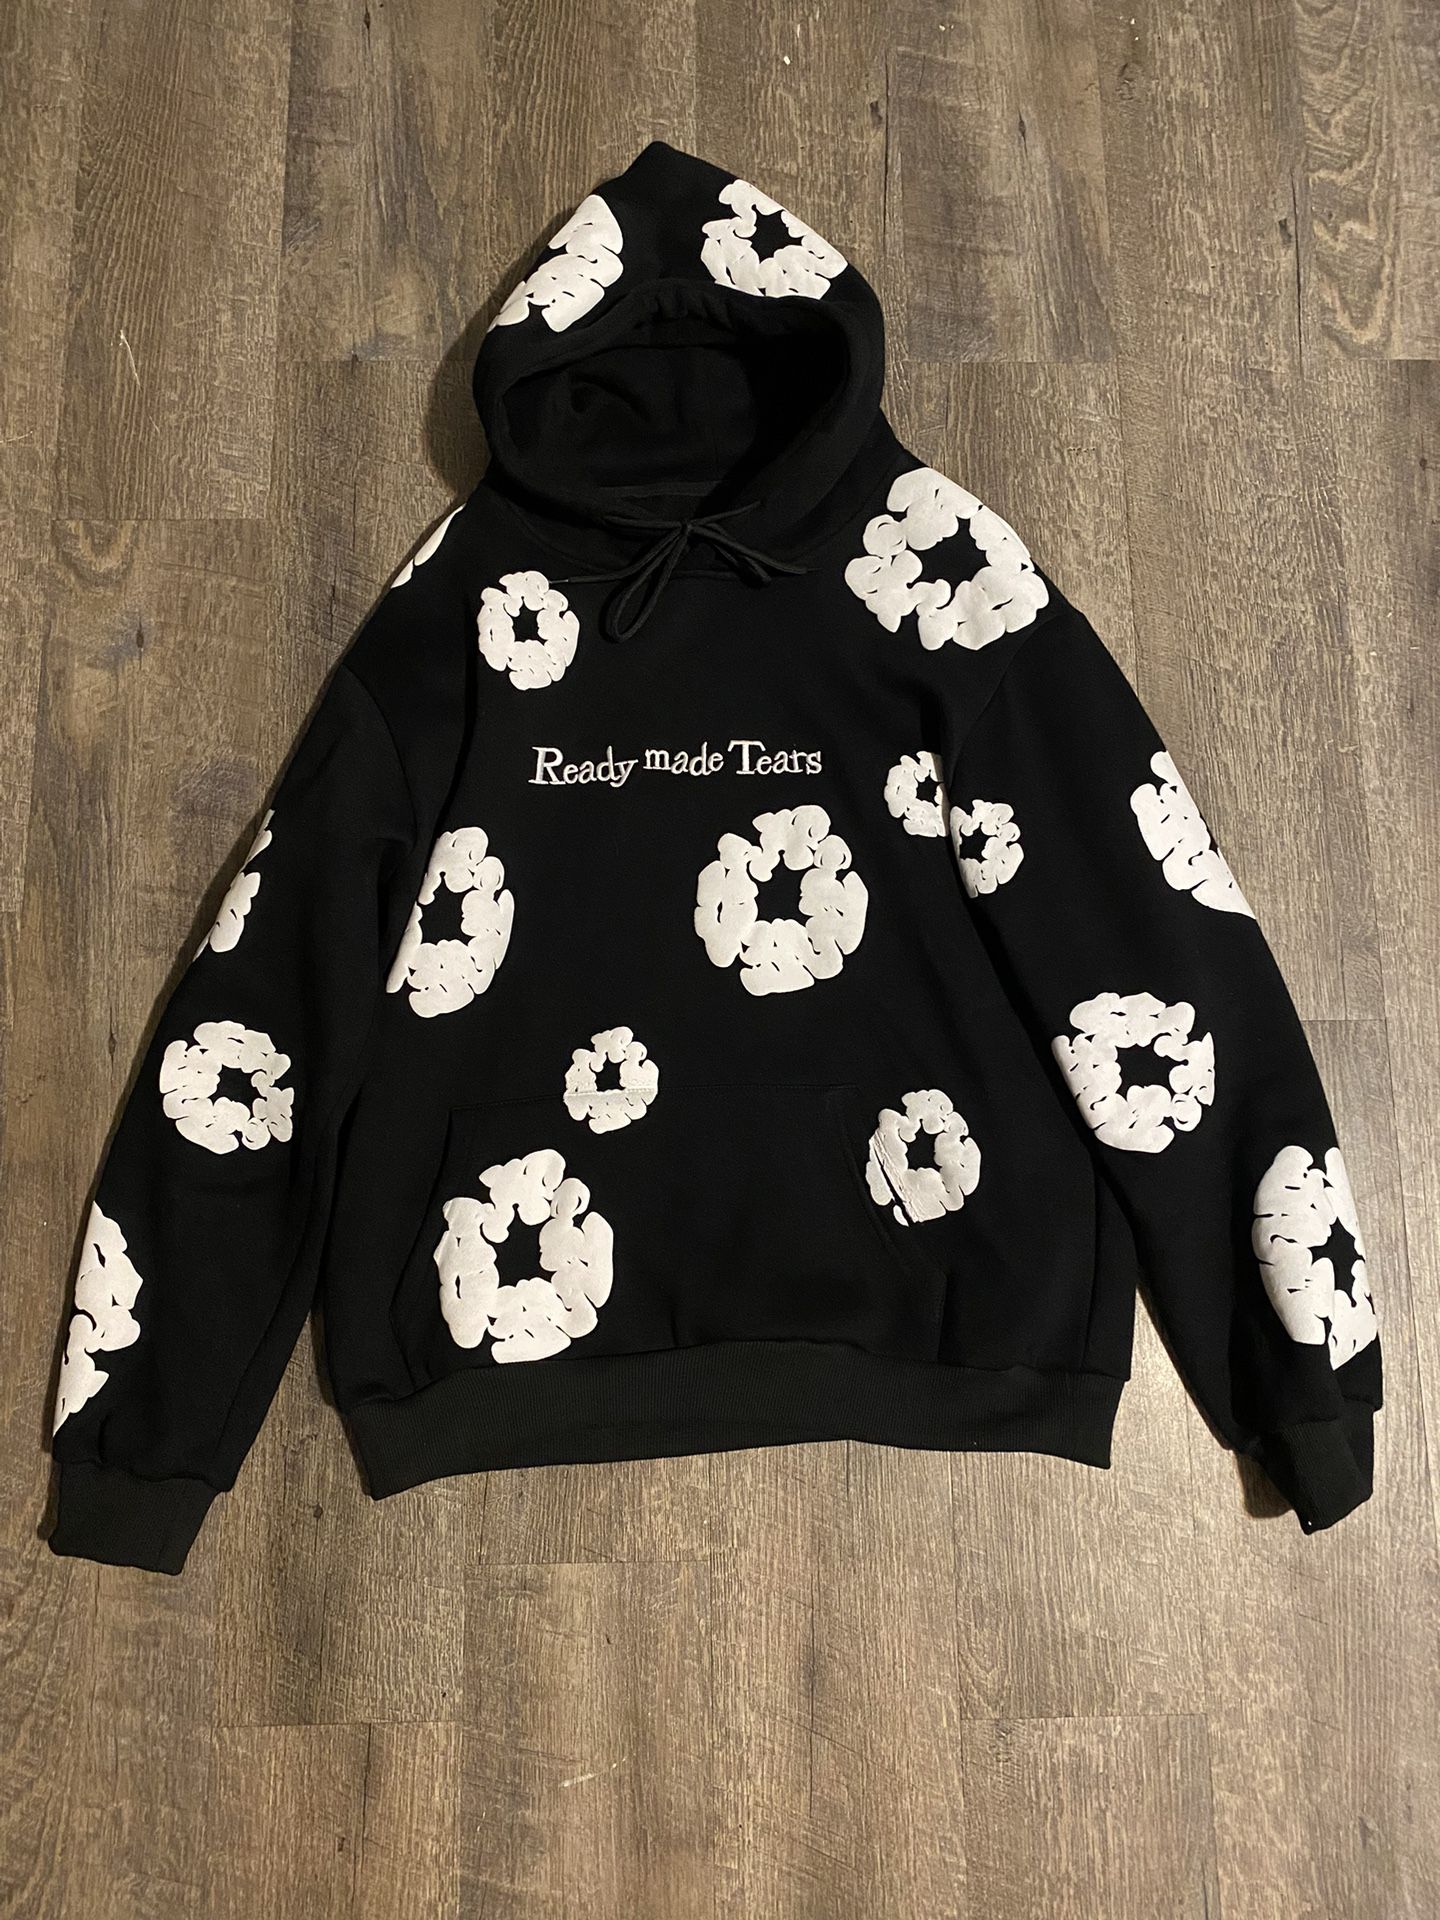 Readymade Tears Hoodie for Sale in Lawrenceville, GA - OfferUp